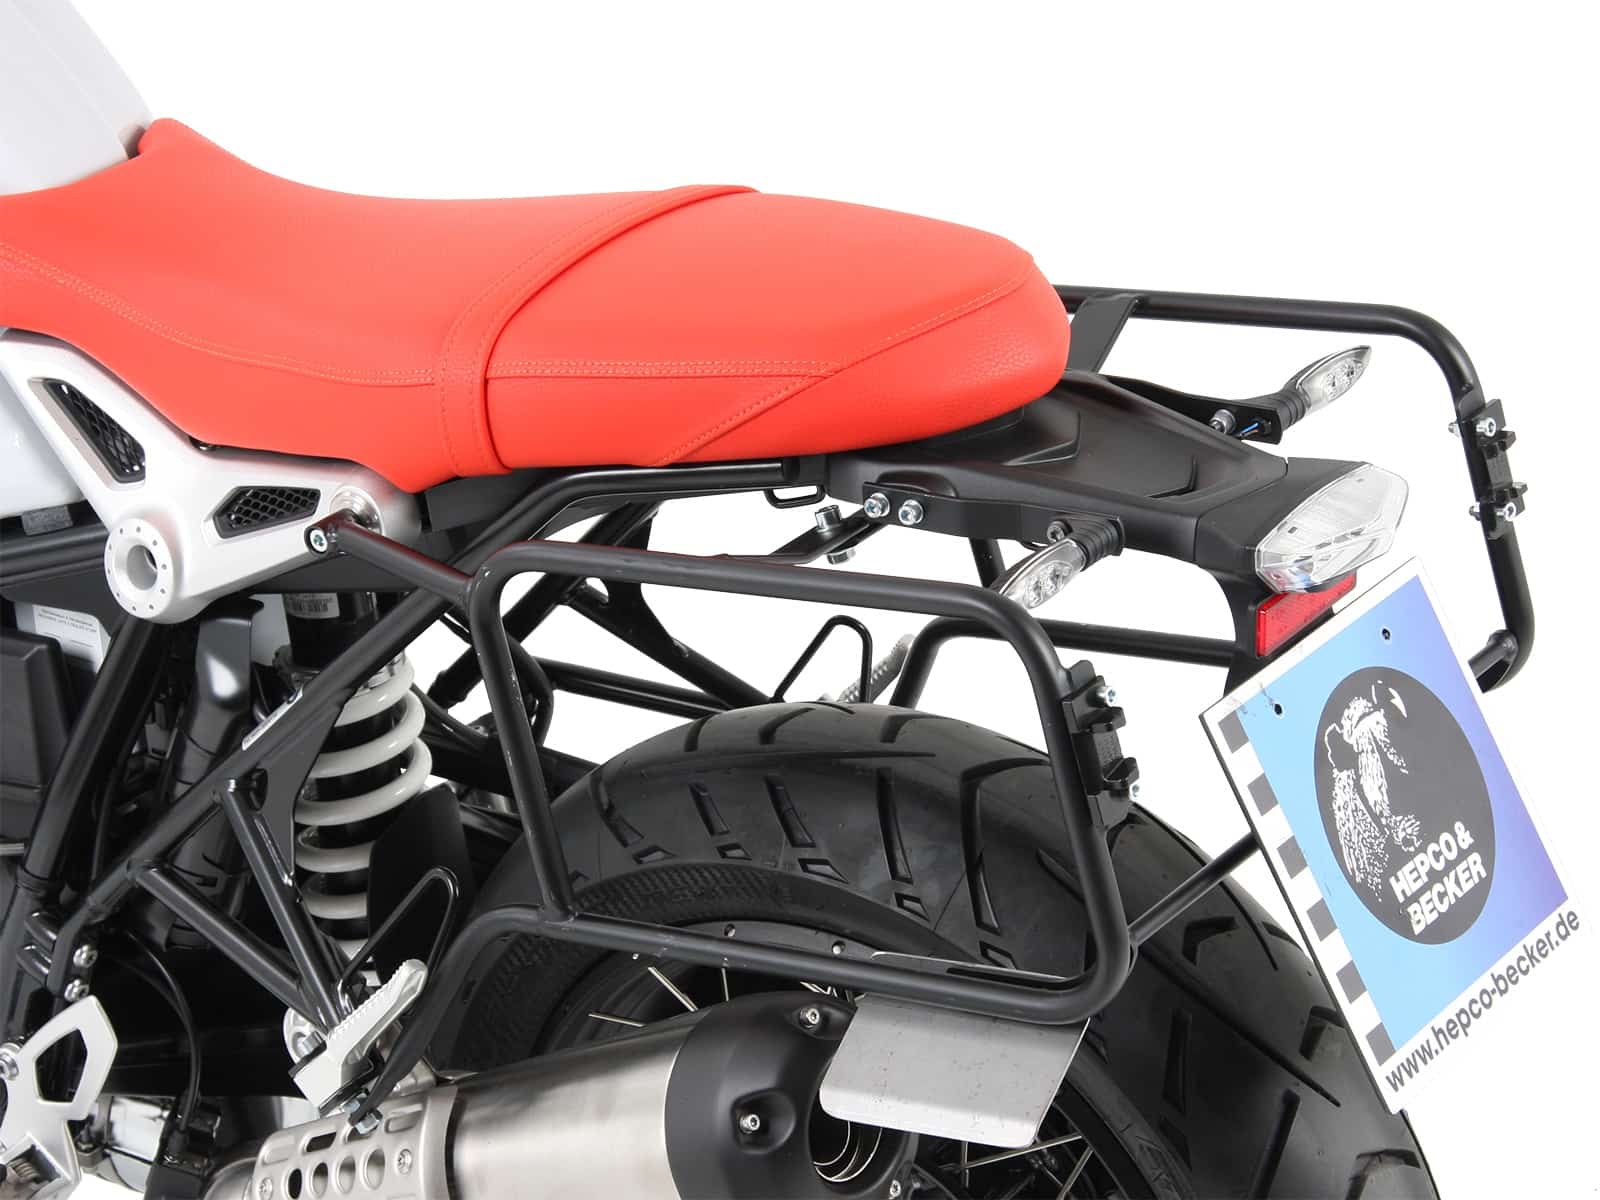 Sidecarrier permanent mounted black for BMW RnineT (2014-2016)